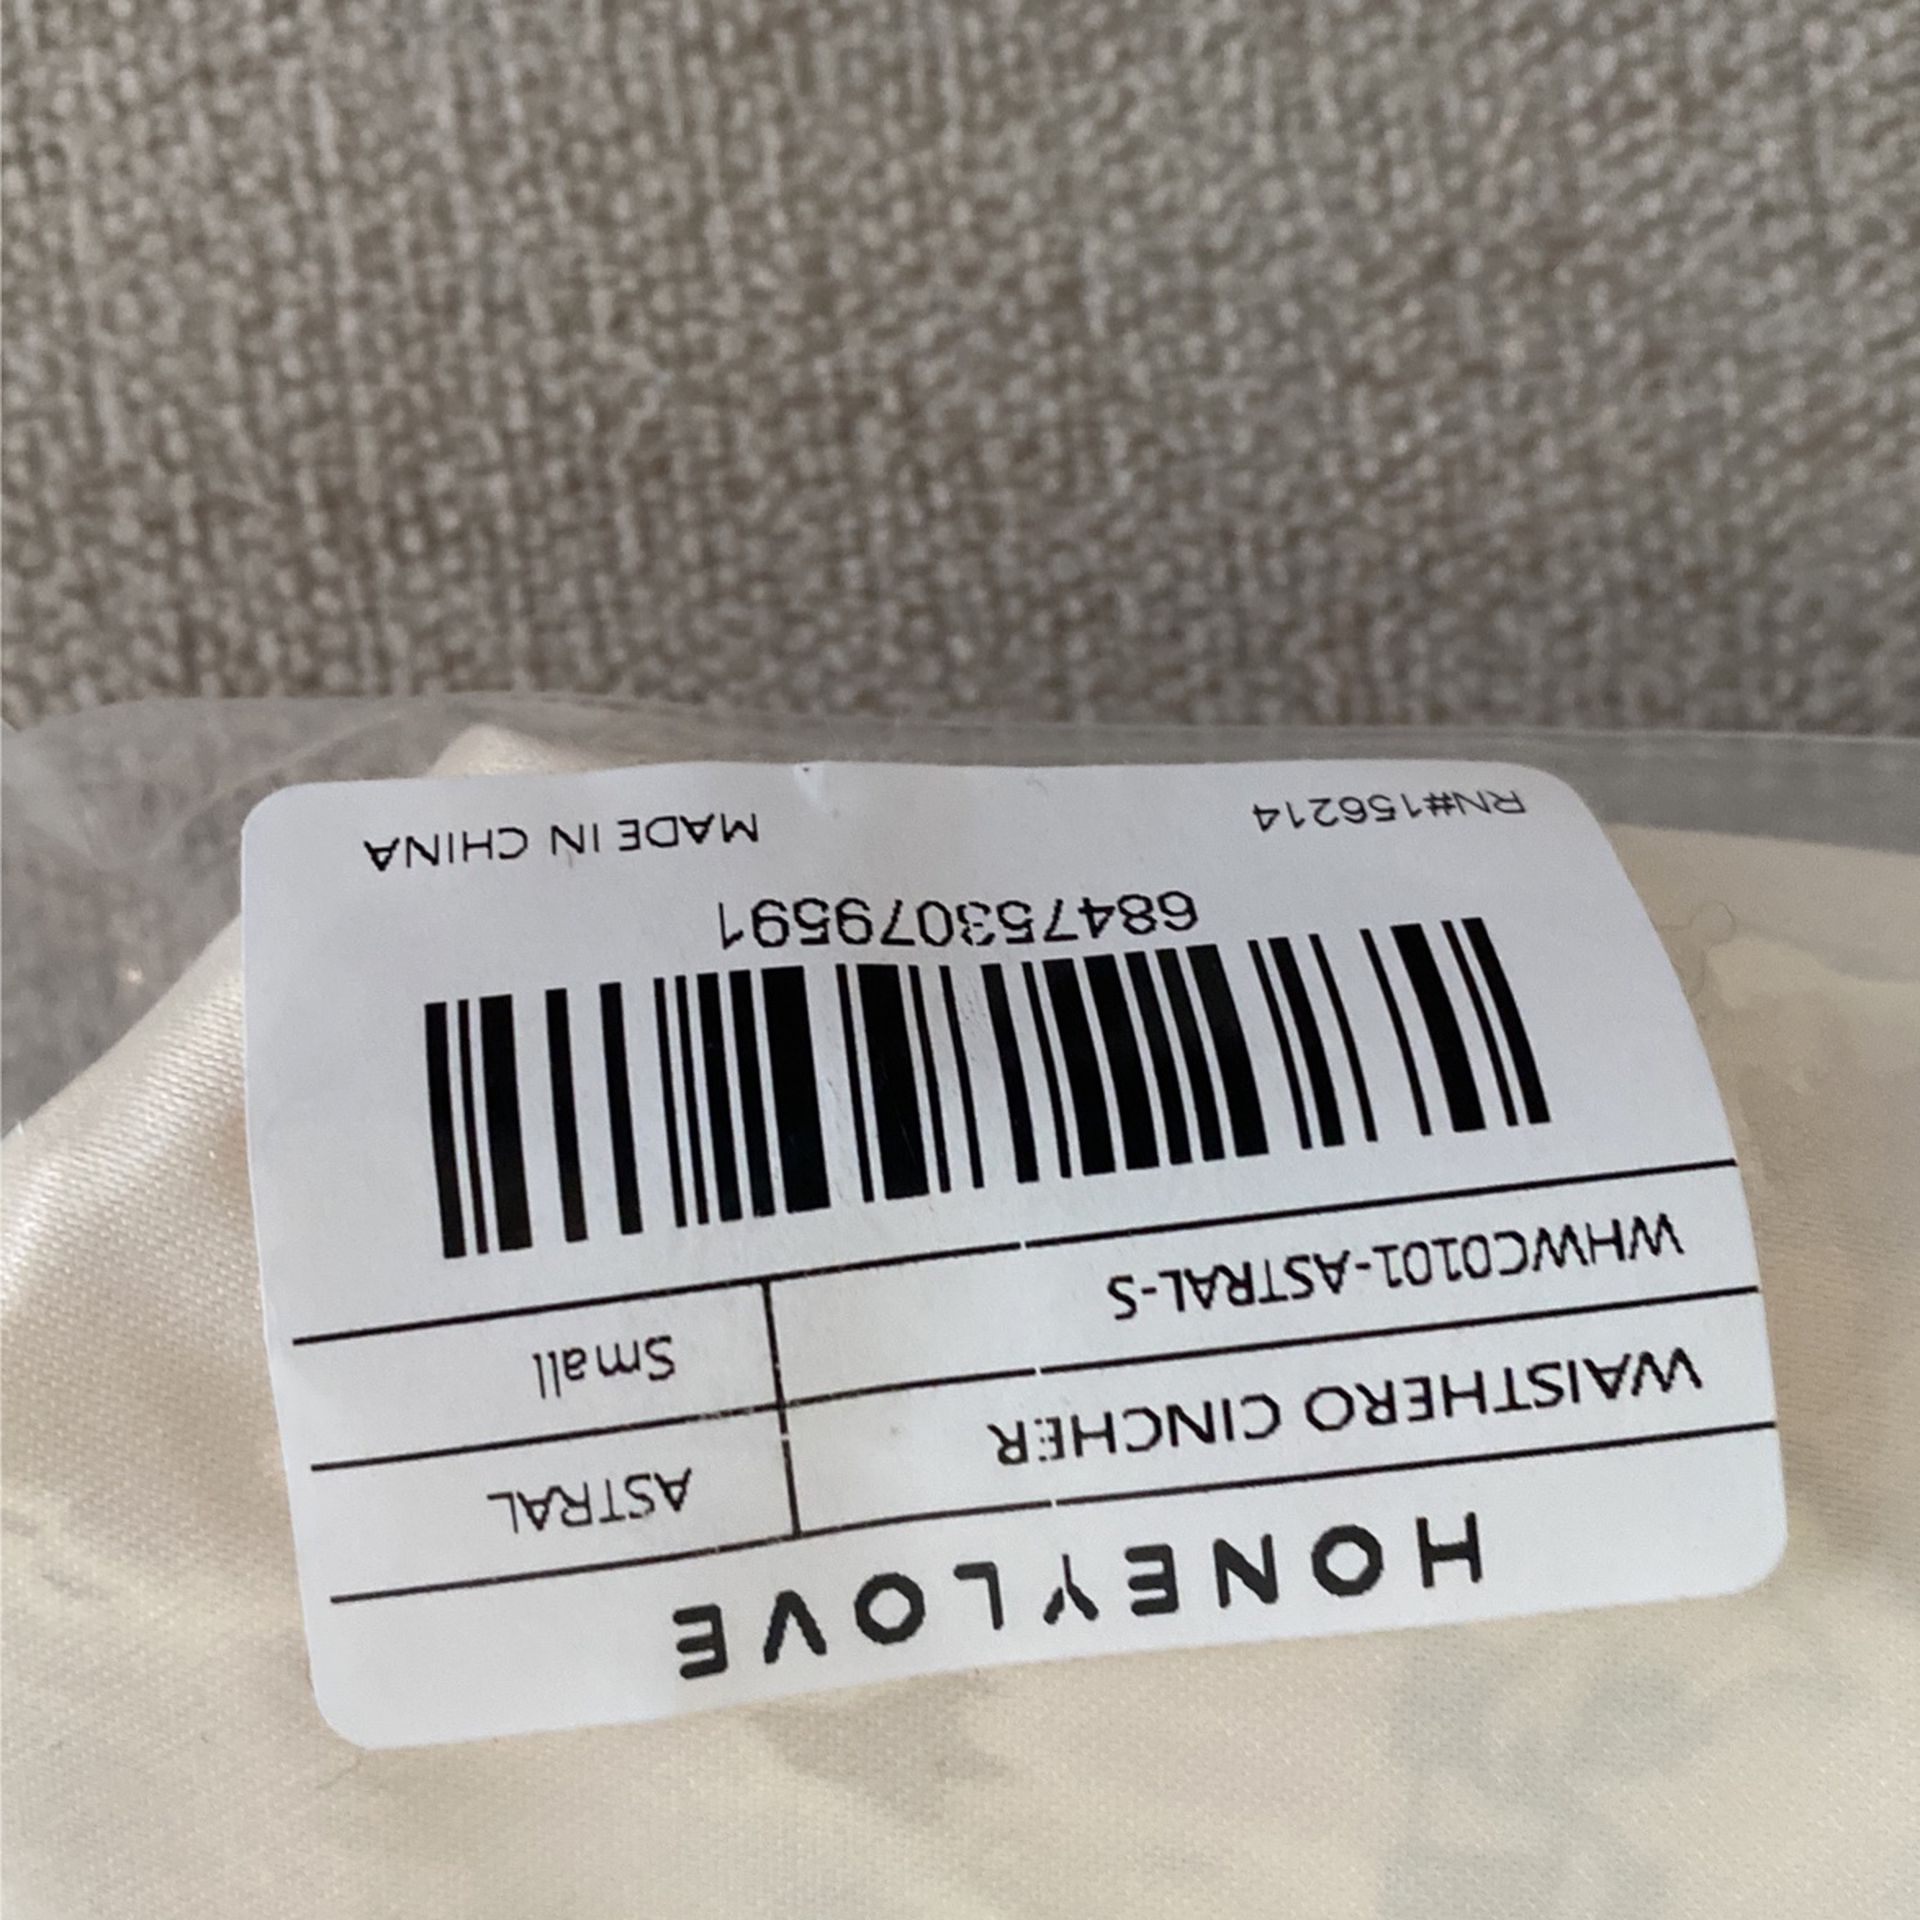 Honeylove Shapewear - Size Small for Sale in Tucson, AZ - OfferUp